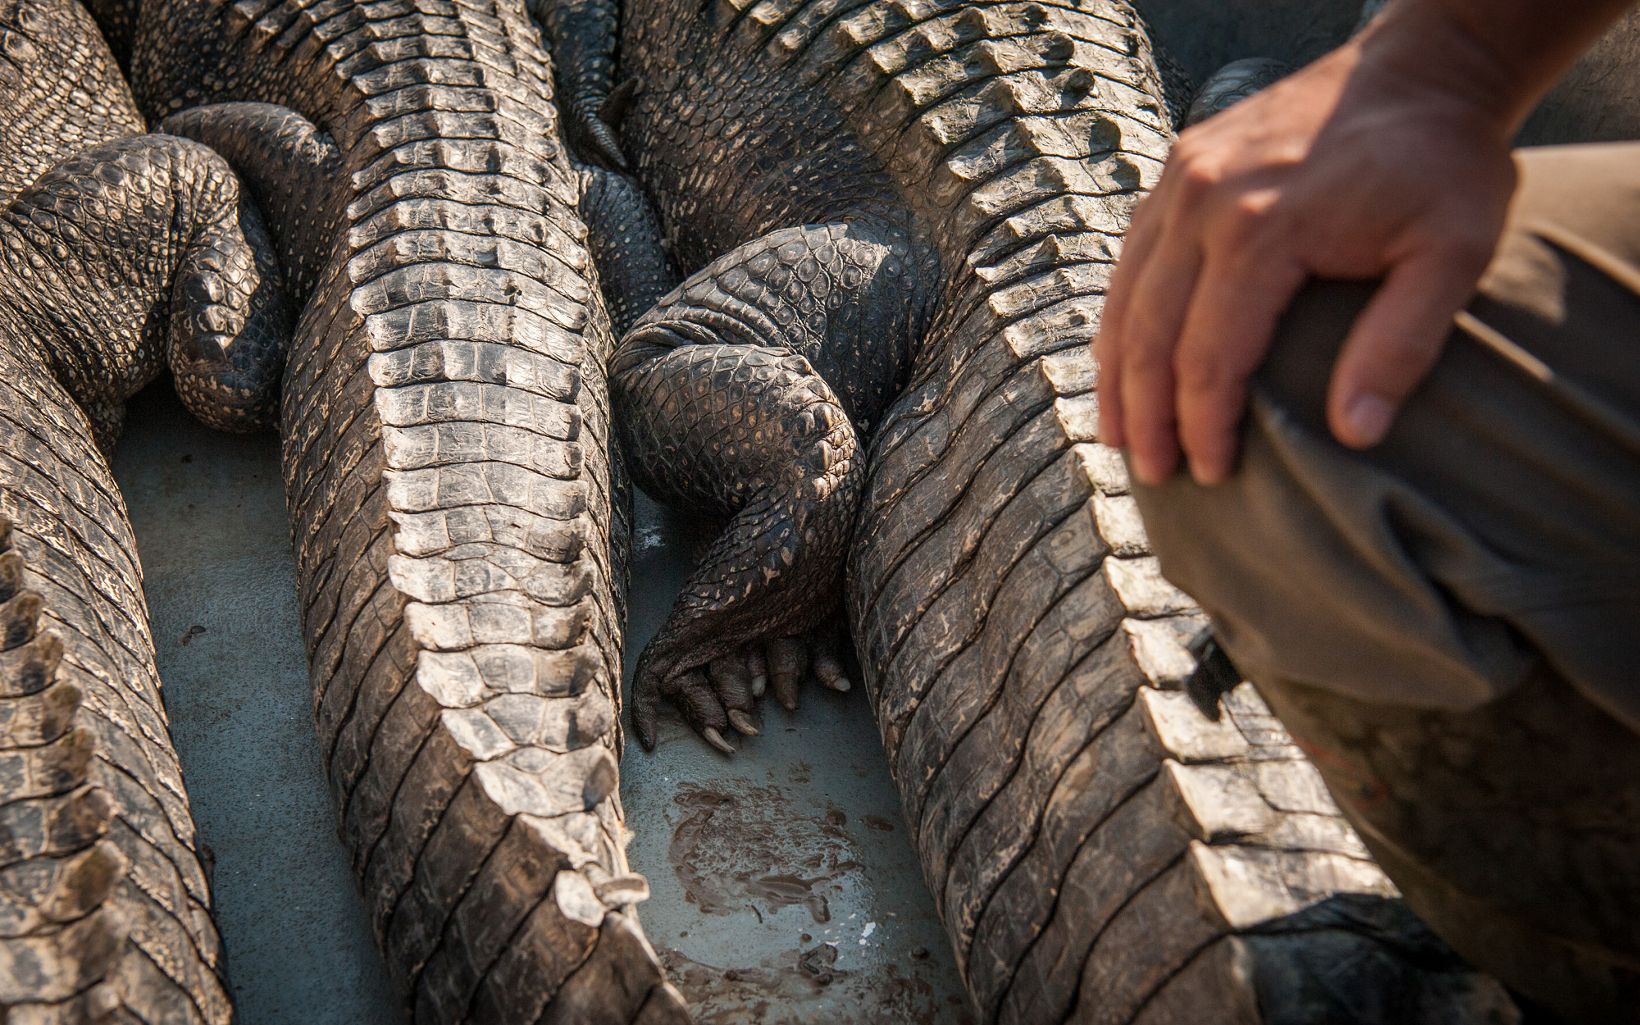 Alligators from a hunt are on a boat. On front of them, a man's knee and hand are visible.